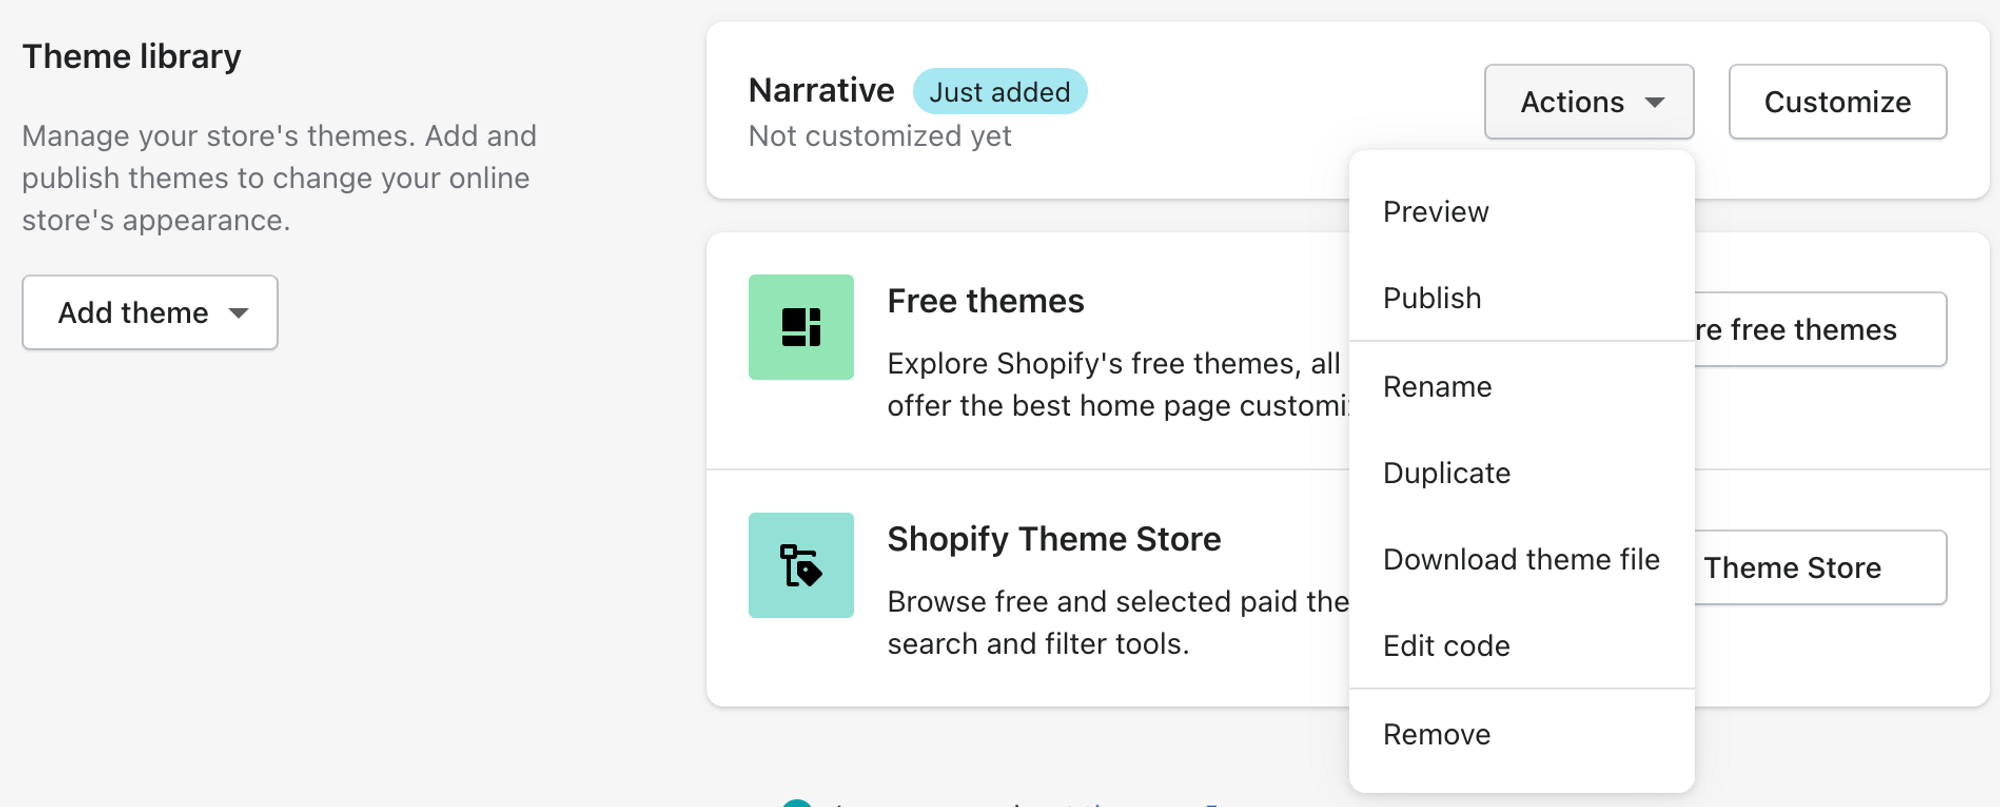 Edit code to add livechat in Shopify!